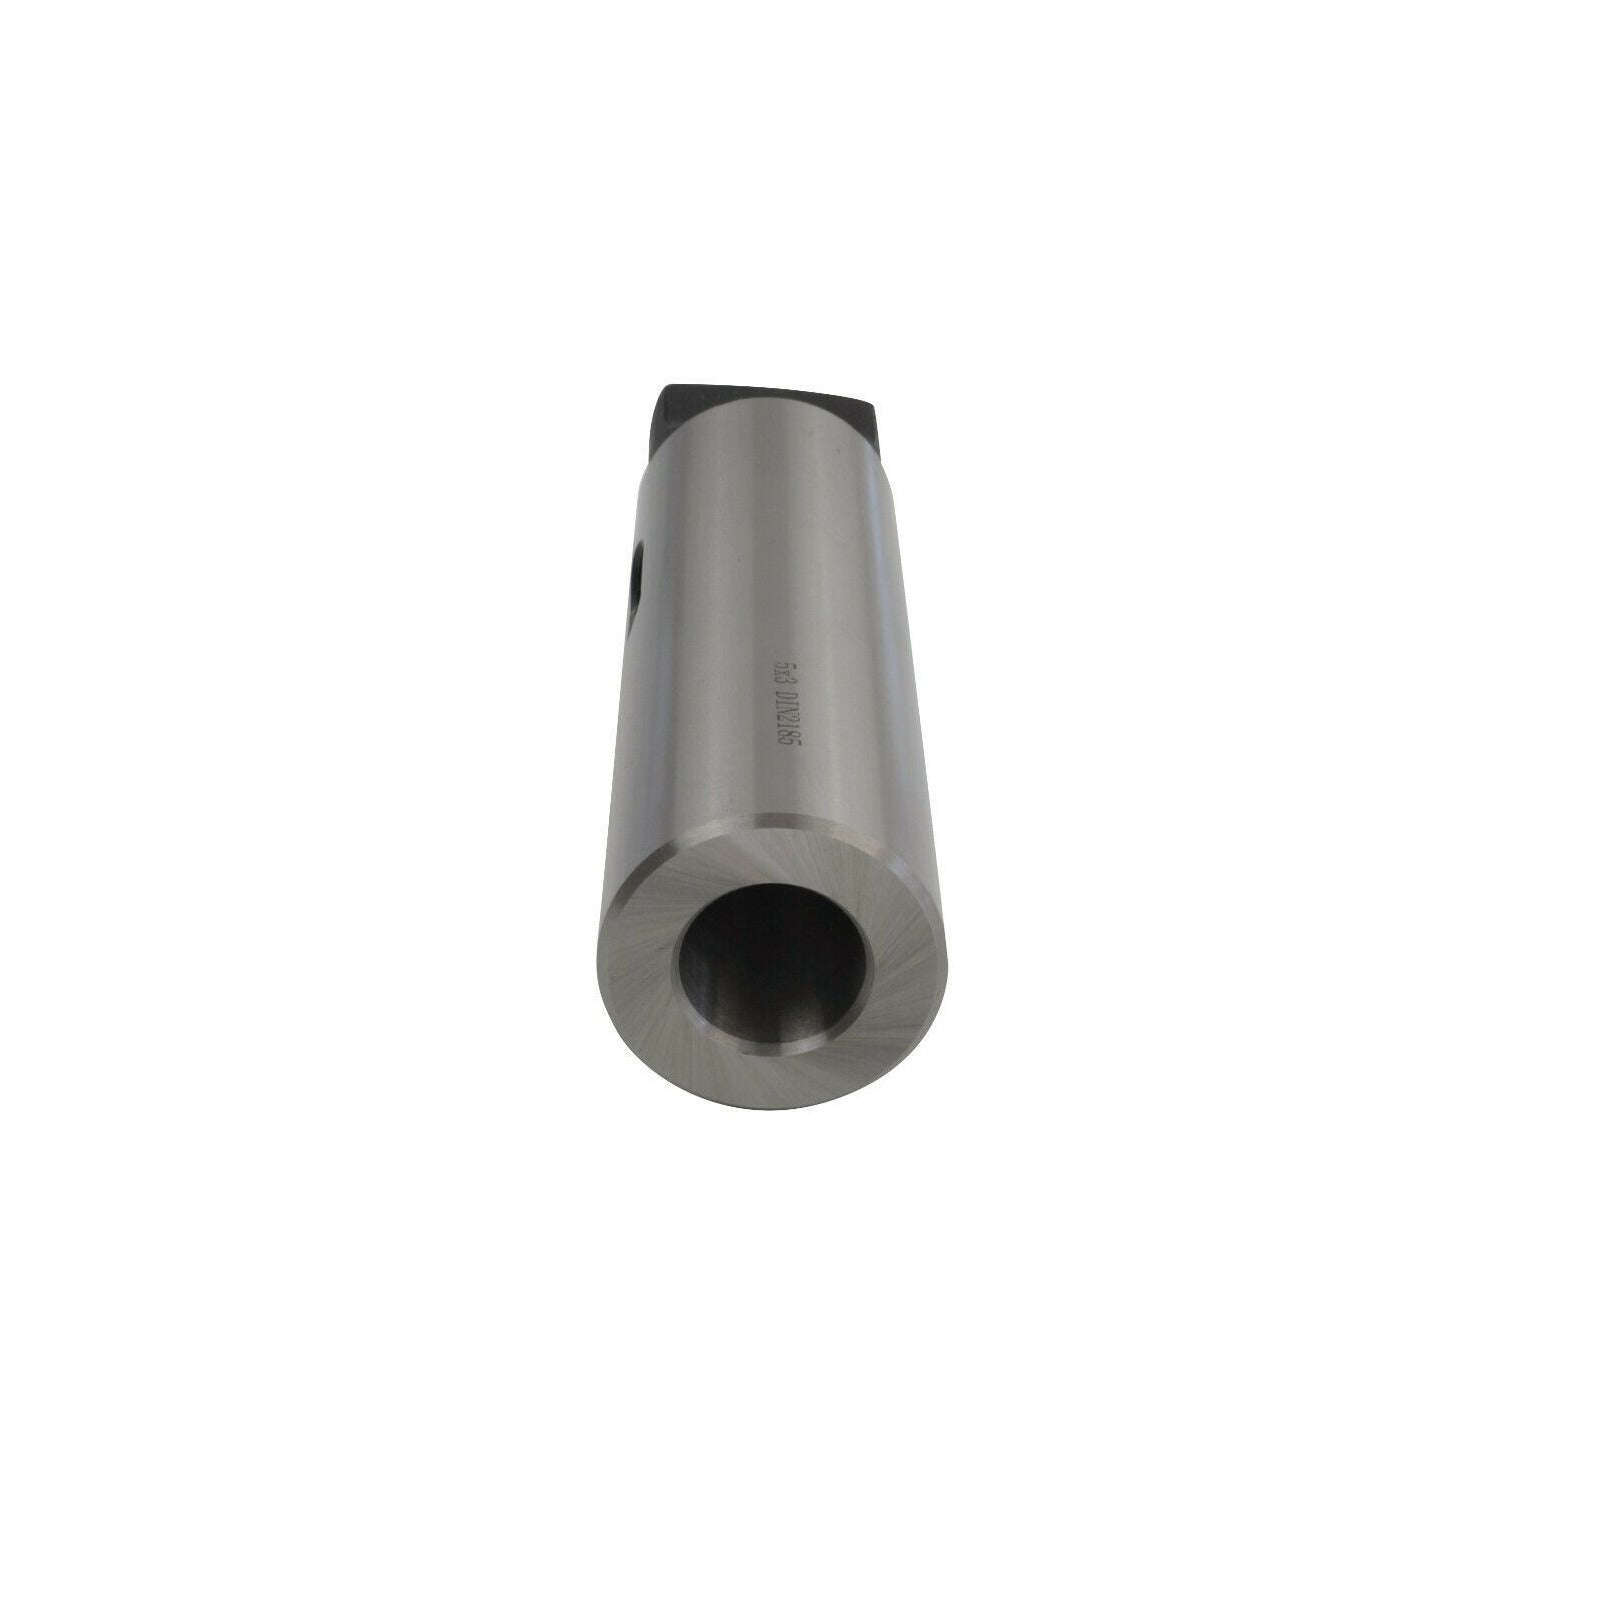 MT3 to MT5 Morse Taper Adapter Reducing Drill Sleeve